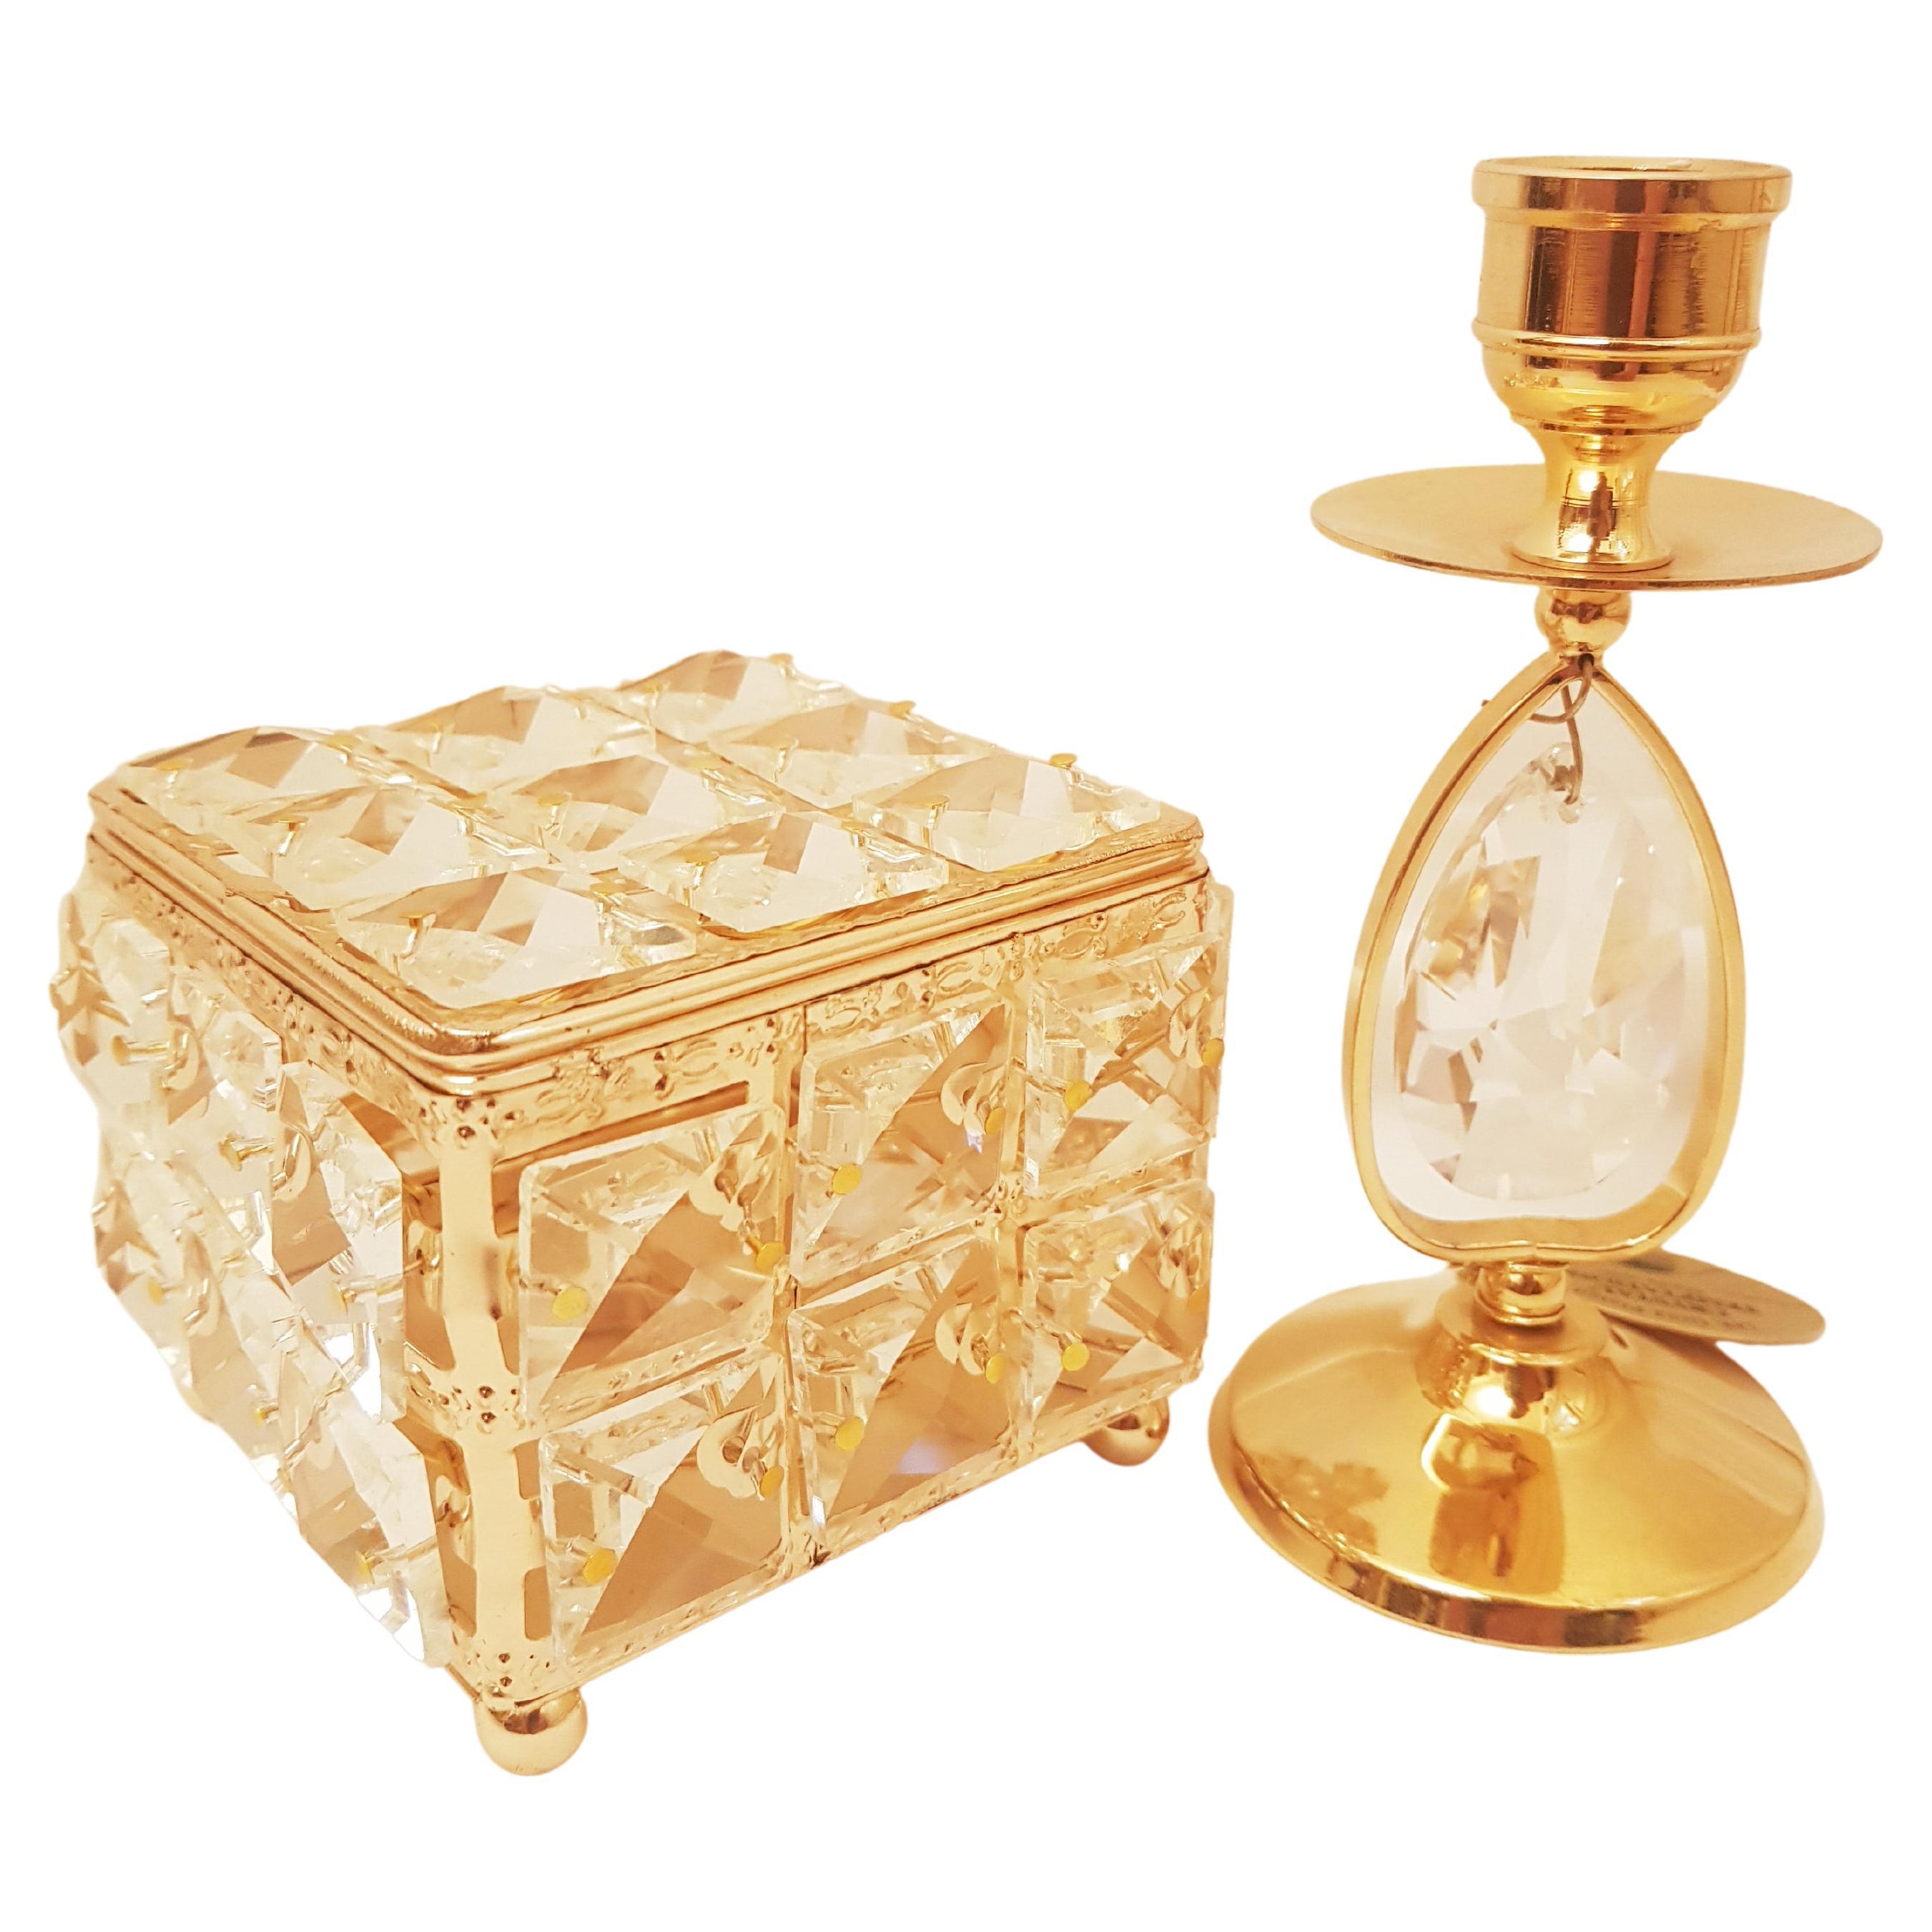 Swarowski Crystal and 24 Kt Gold Plated Jewellery Box and Candle Holder For Sale